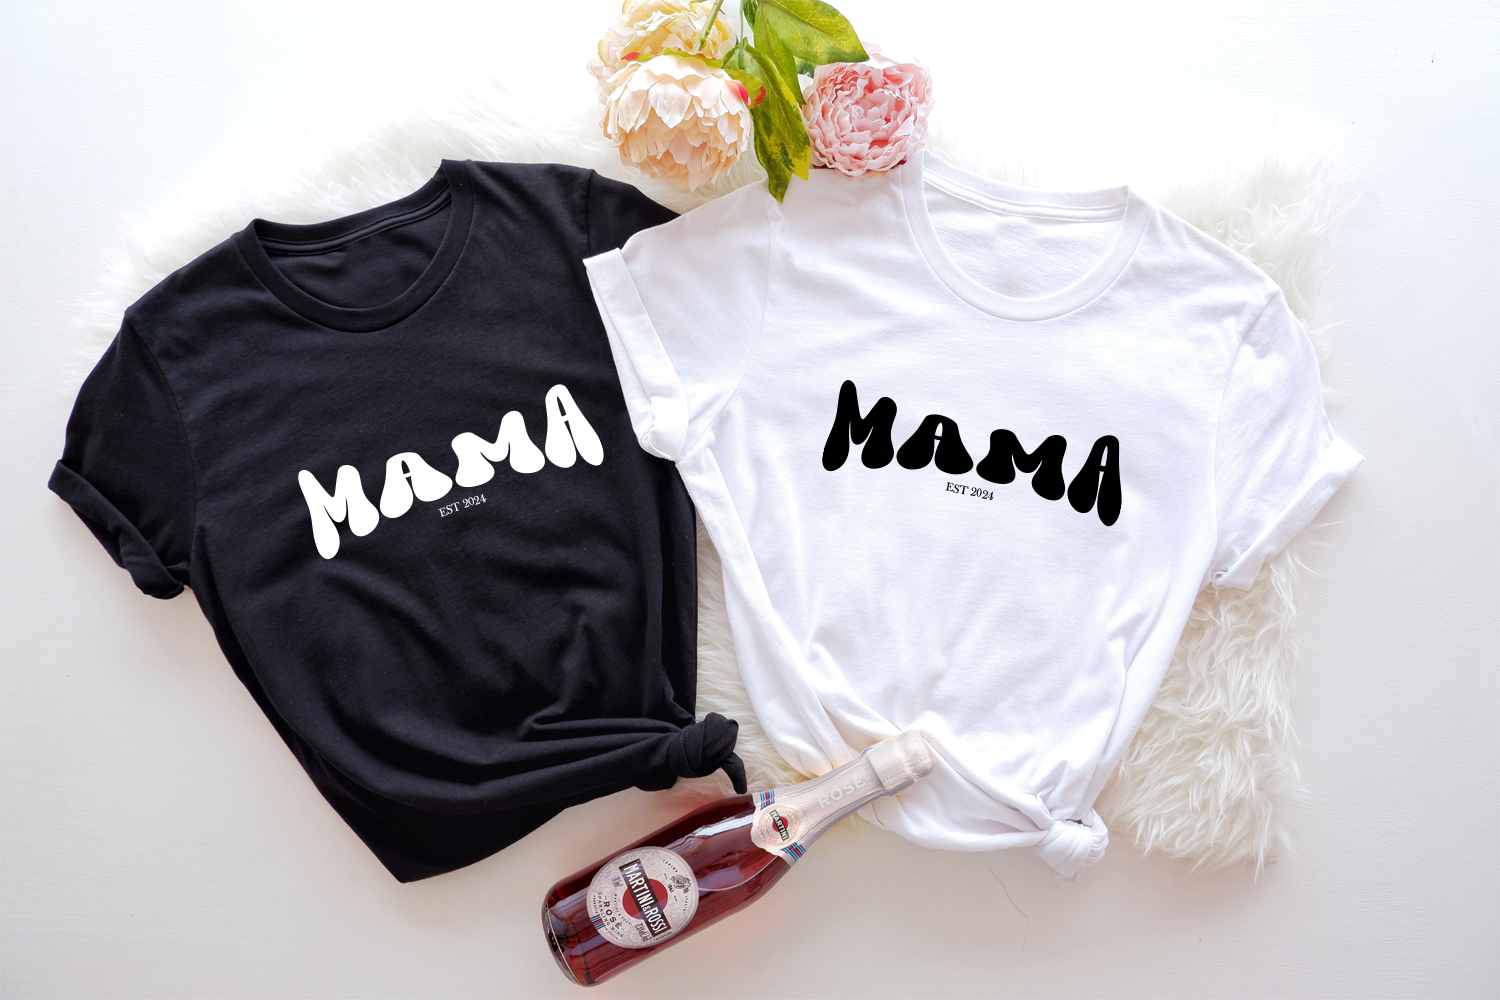 Adorable Mama T-shirt: A charming and delightful tee for every mom. 